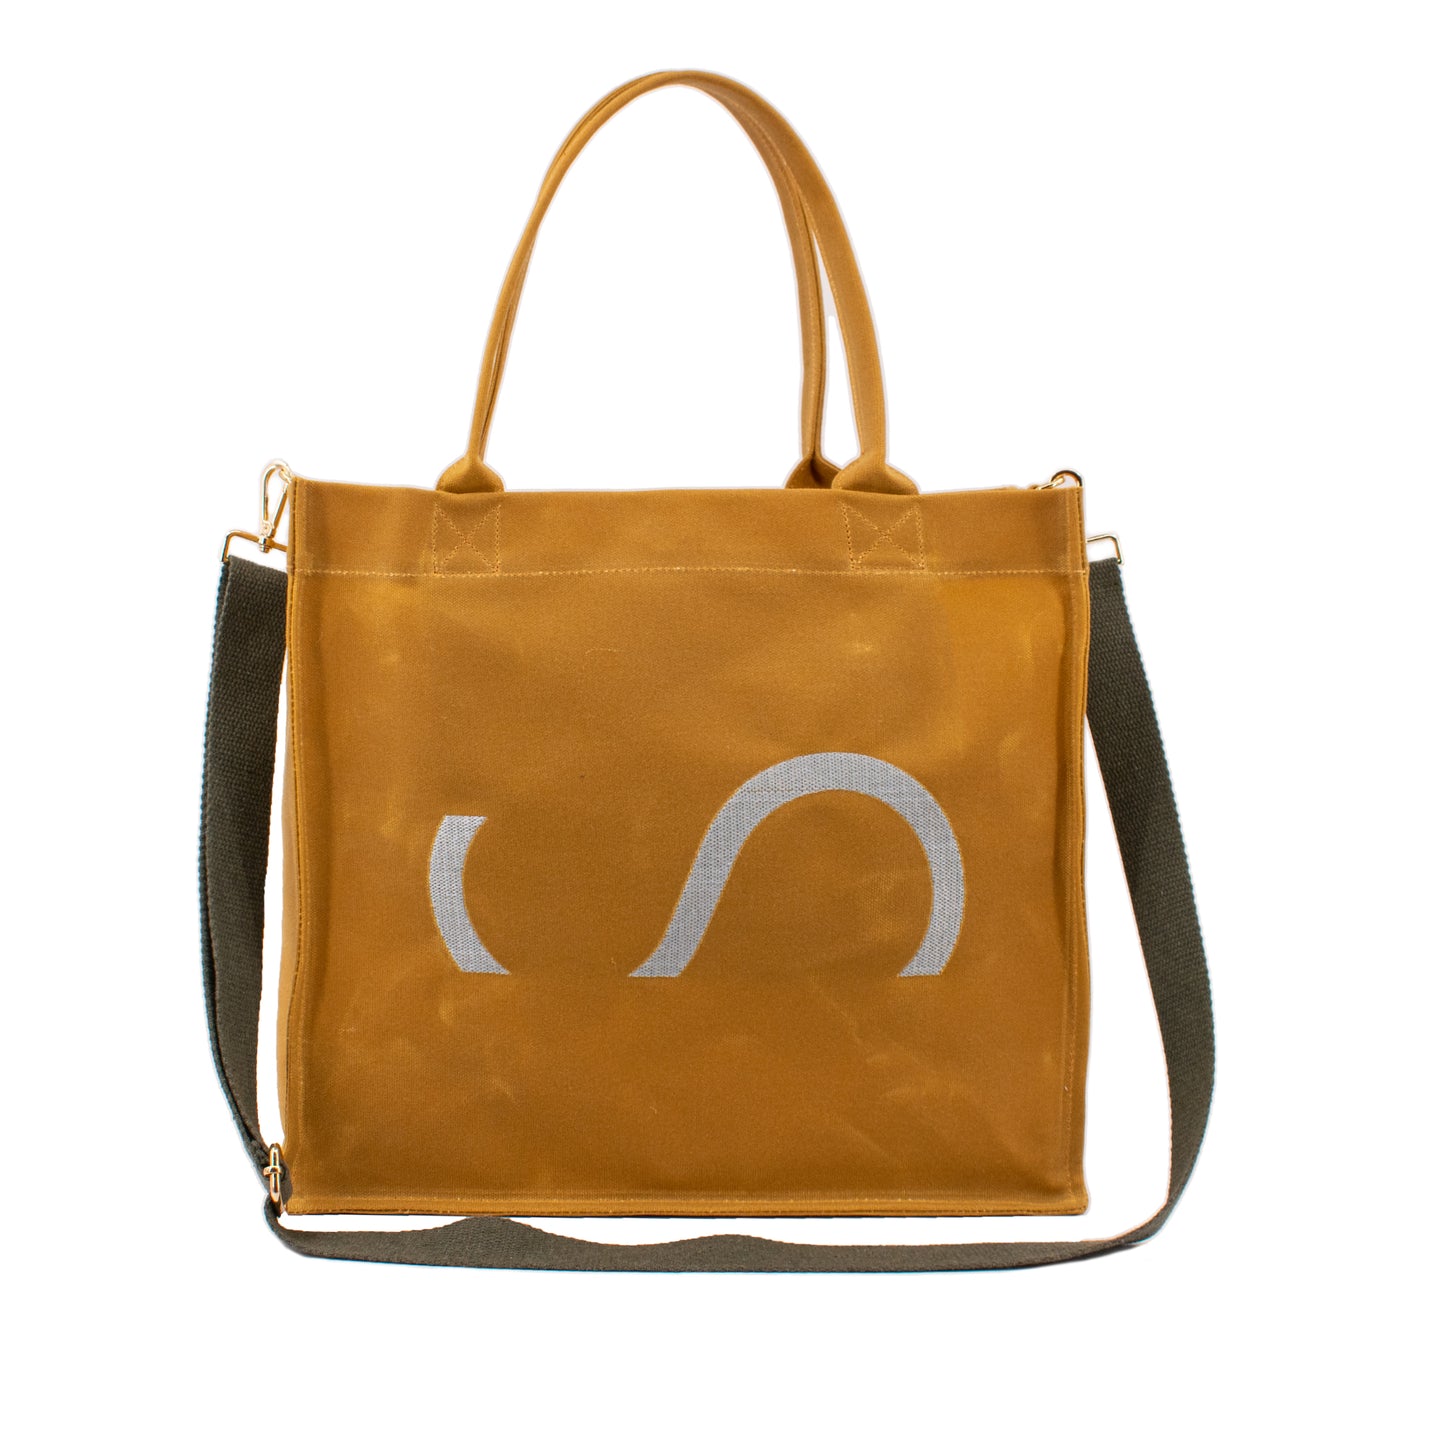 HCANSS WAXED CANVAS MUSTARD LARGE TOTE BAG